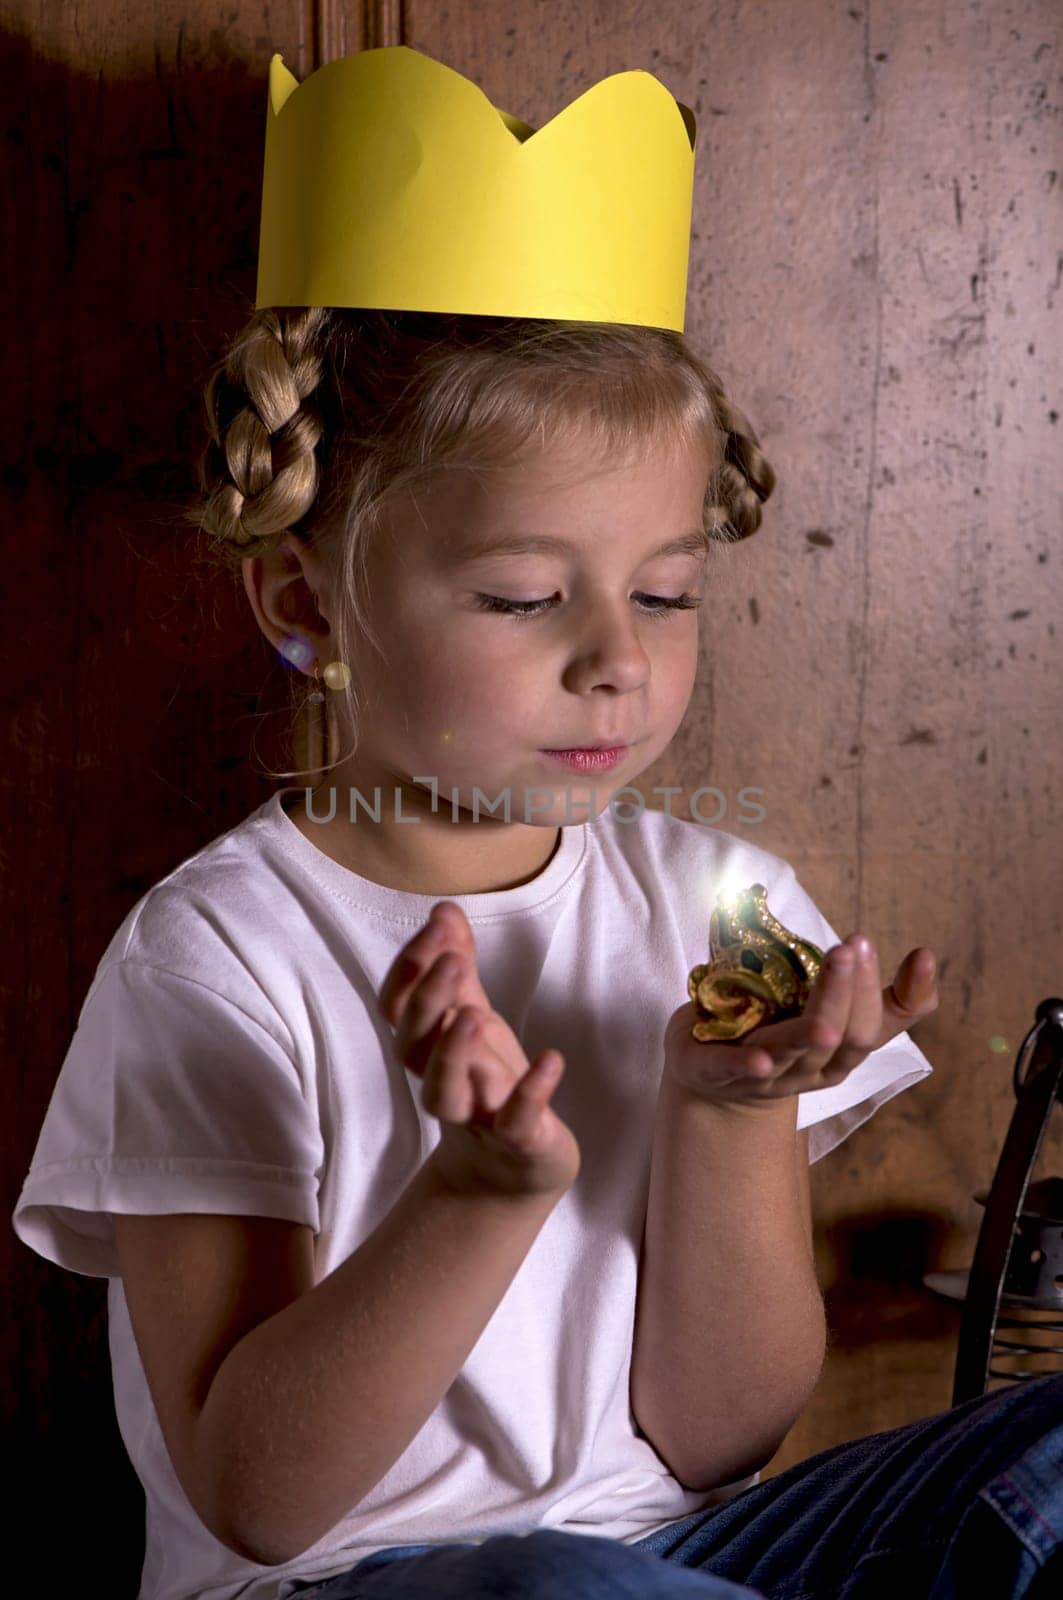 princess girl with toy frog. Cute little girl playing with a toy frog, pretending to be a princess